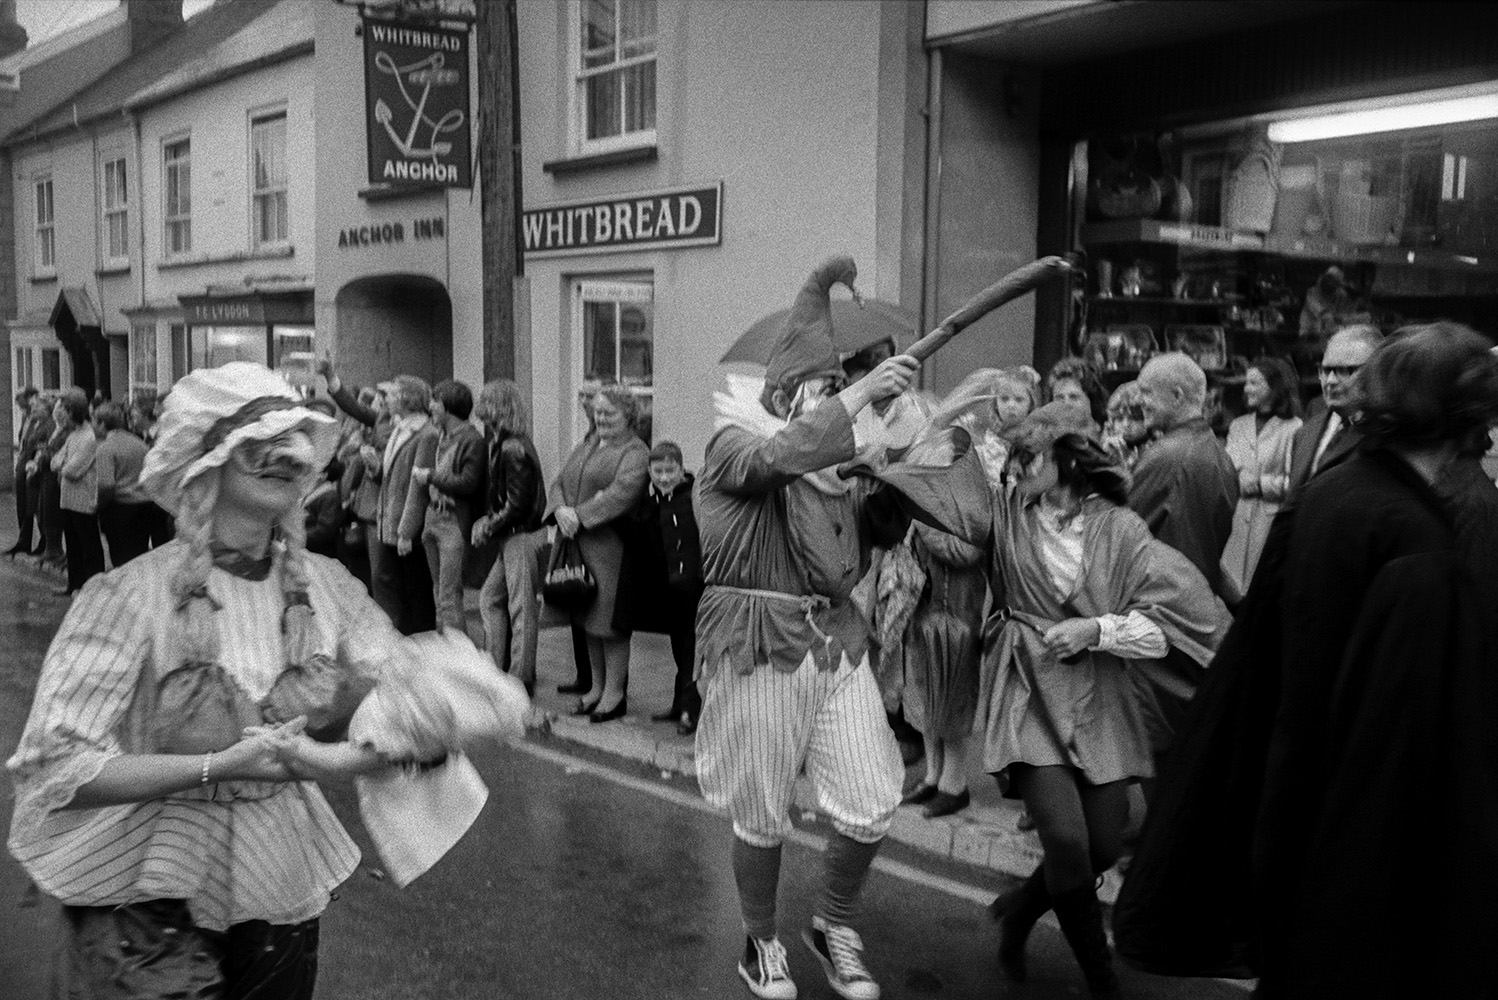 Spectators outside the Anchor Inn watching people in costumes and masks dancing through South Street in the South Molton carnival parade. The Inn is now Hungs Chinese Restaurant. The shop next door, Kingdon's Hardware Shop, is now The Factory Shop.